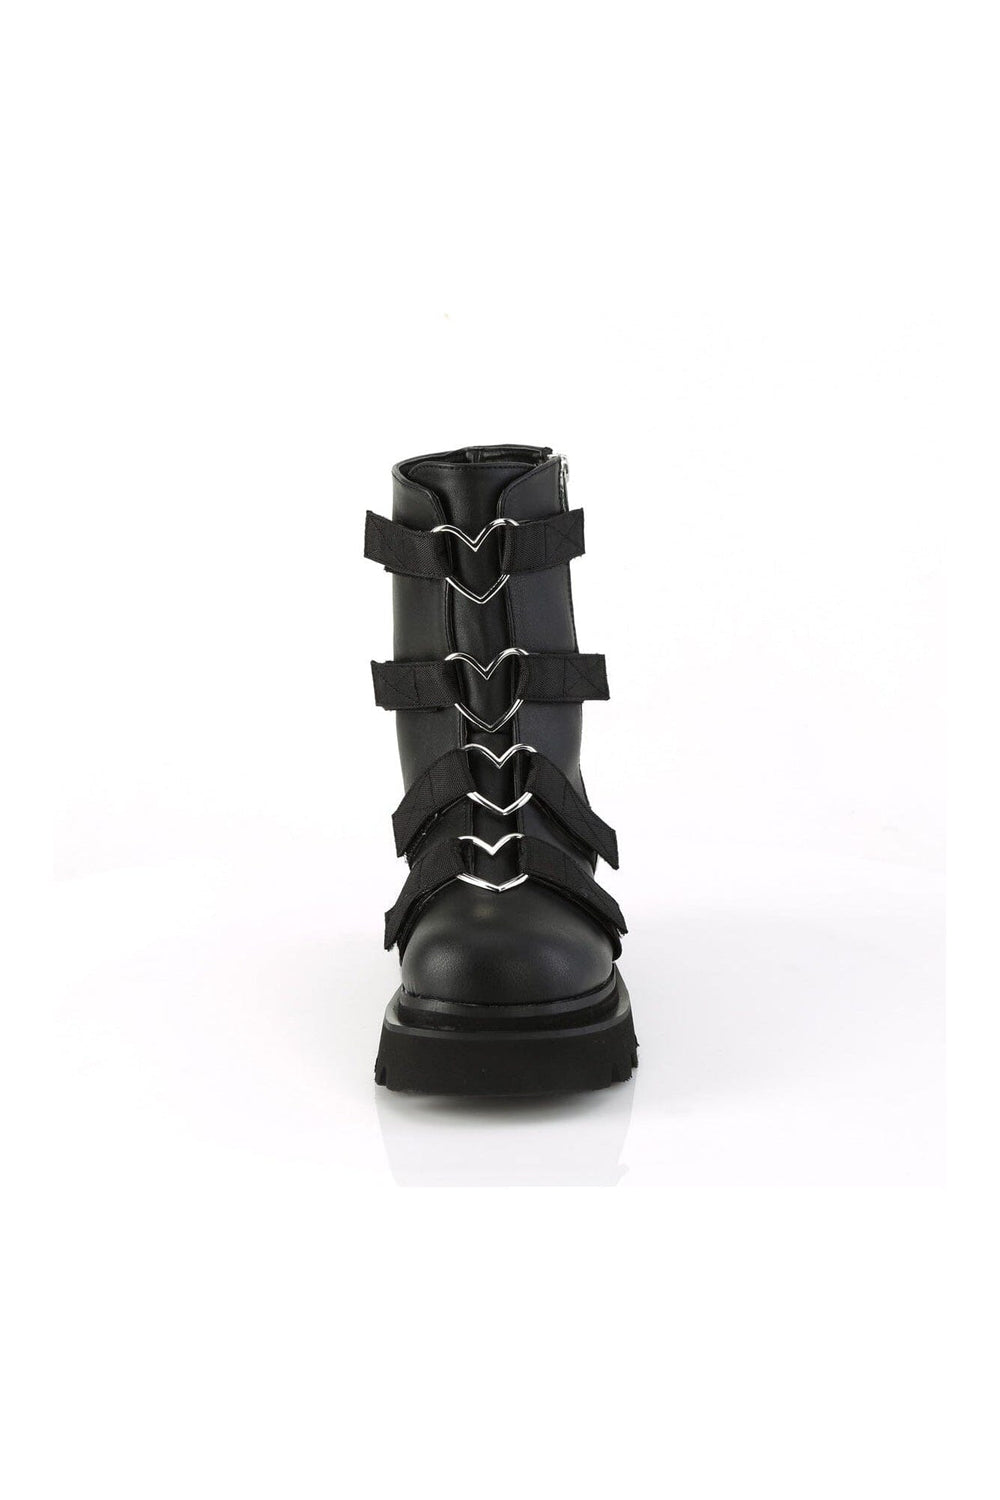 RENEGADE-50 Black Vegan Leather Ankle Boot-Ankle Boots-Demonia-SEXYSHOES.COM